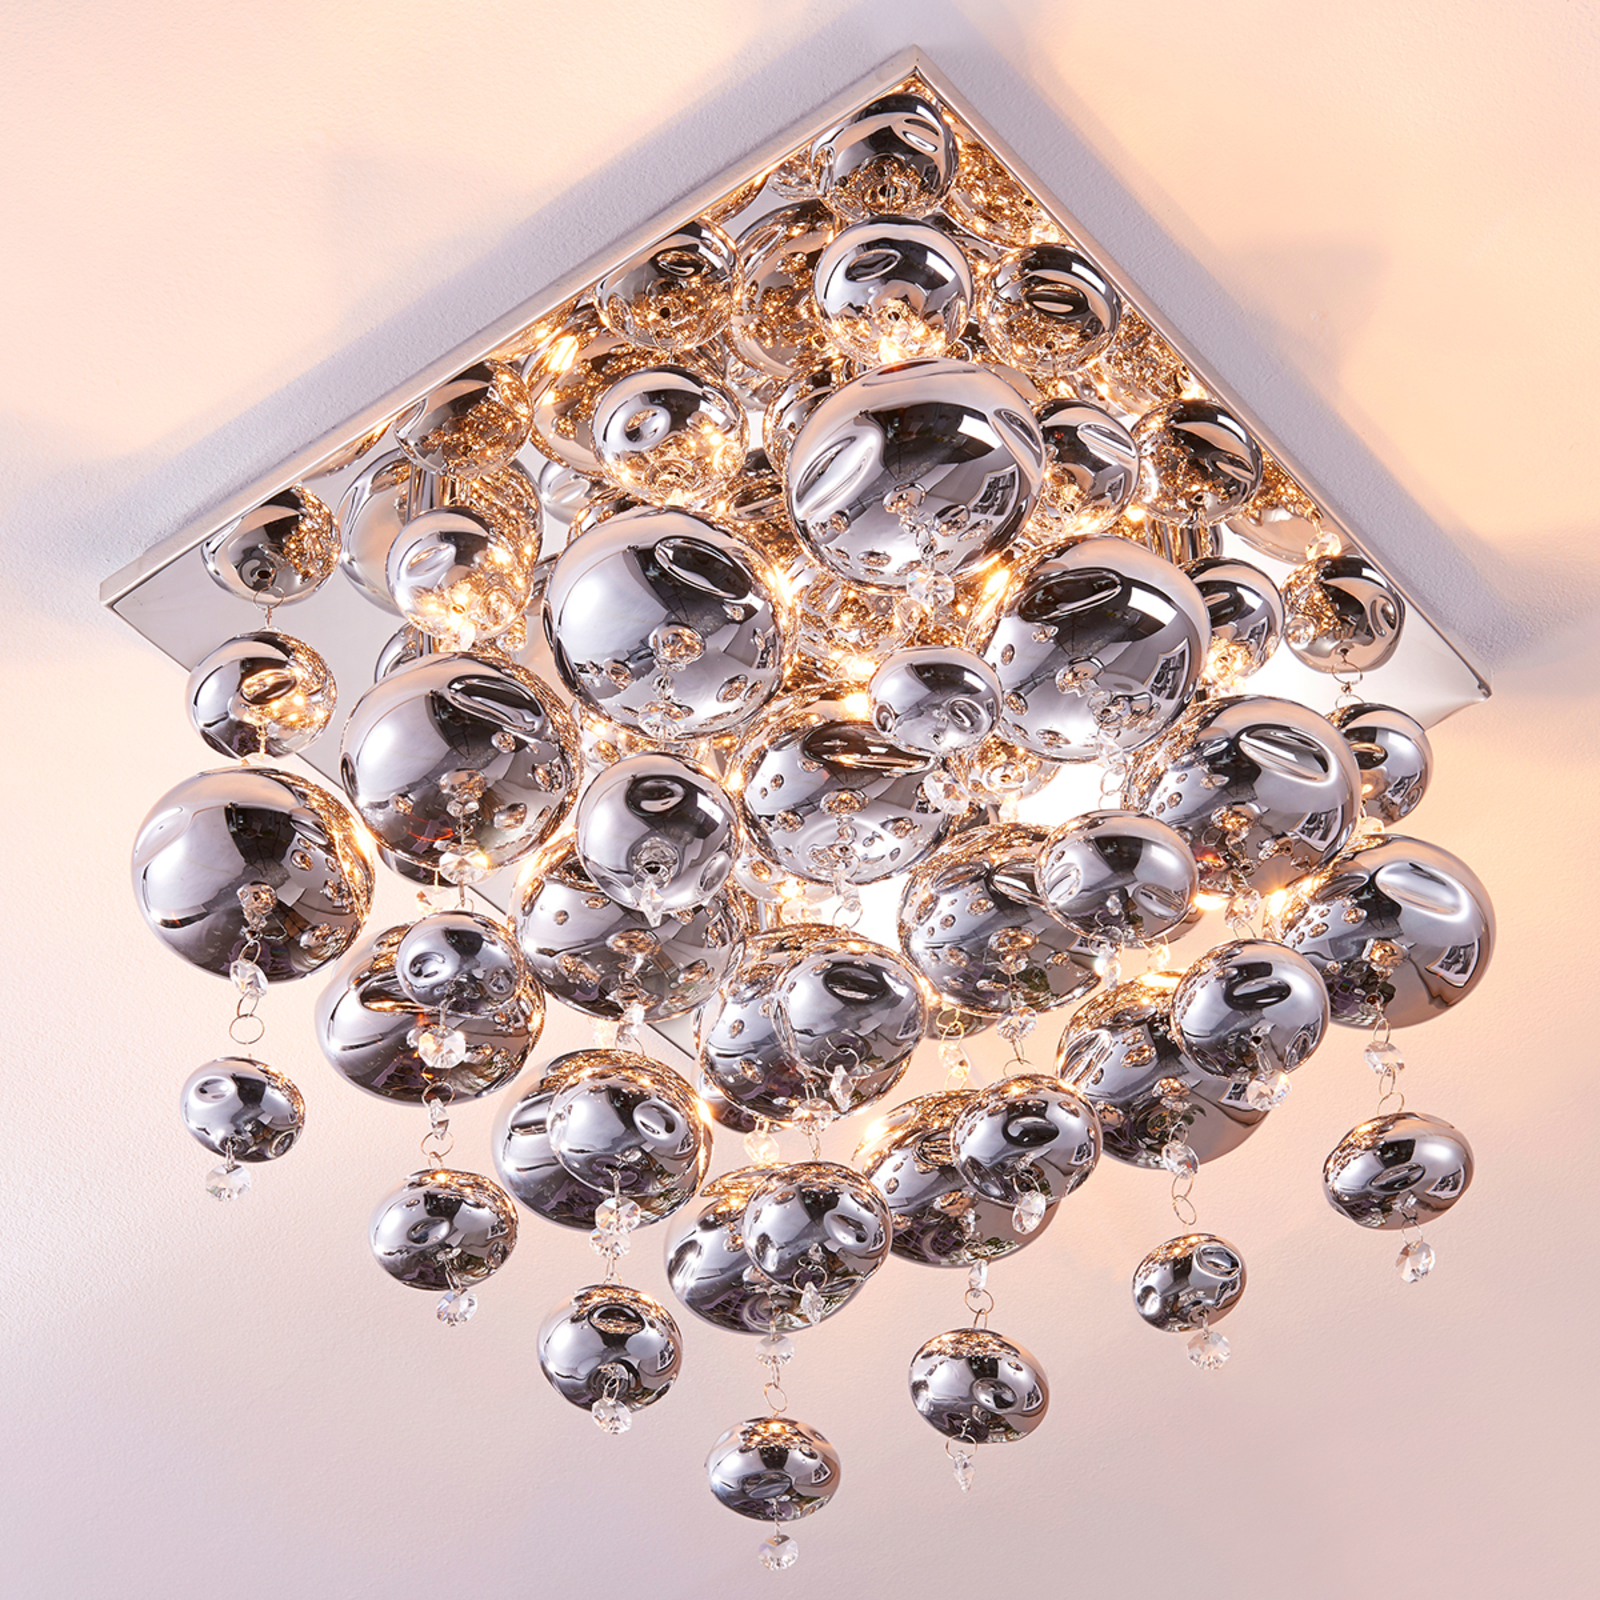 Ceiling light Esfera hung with glass balls